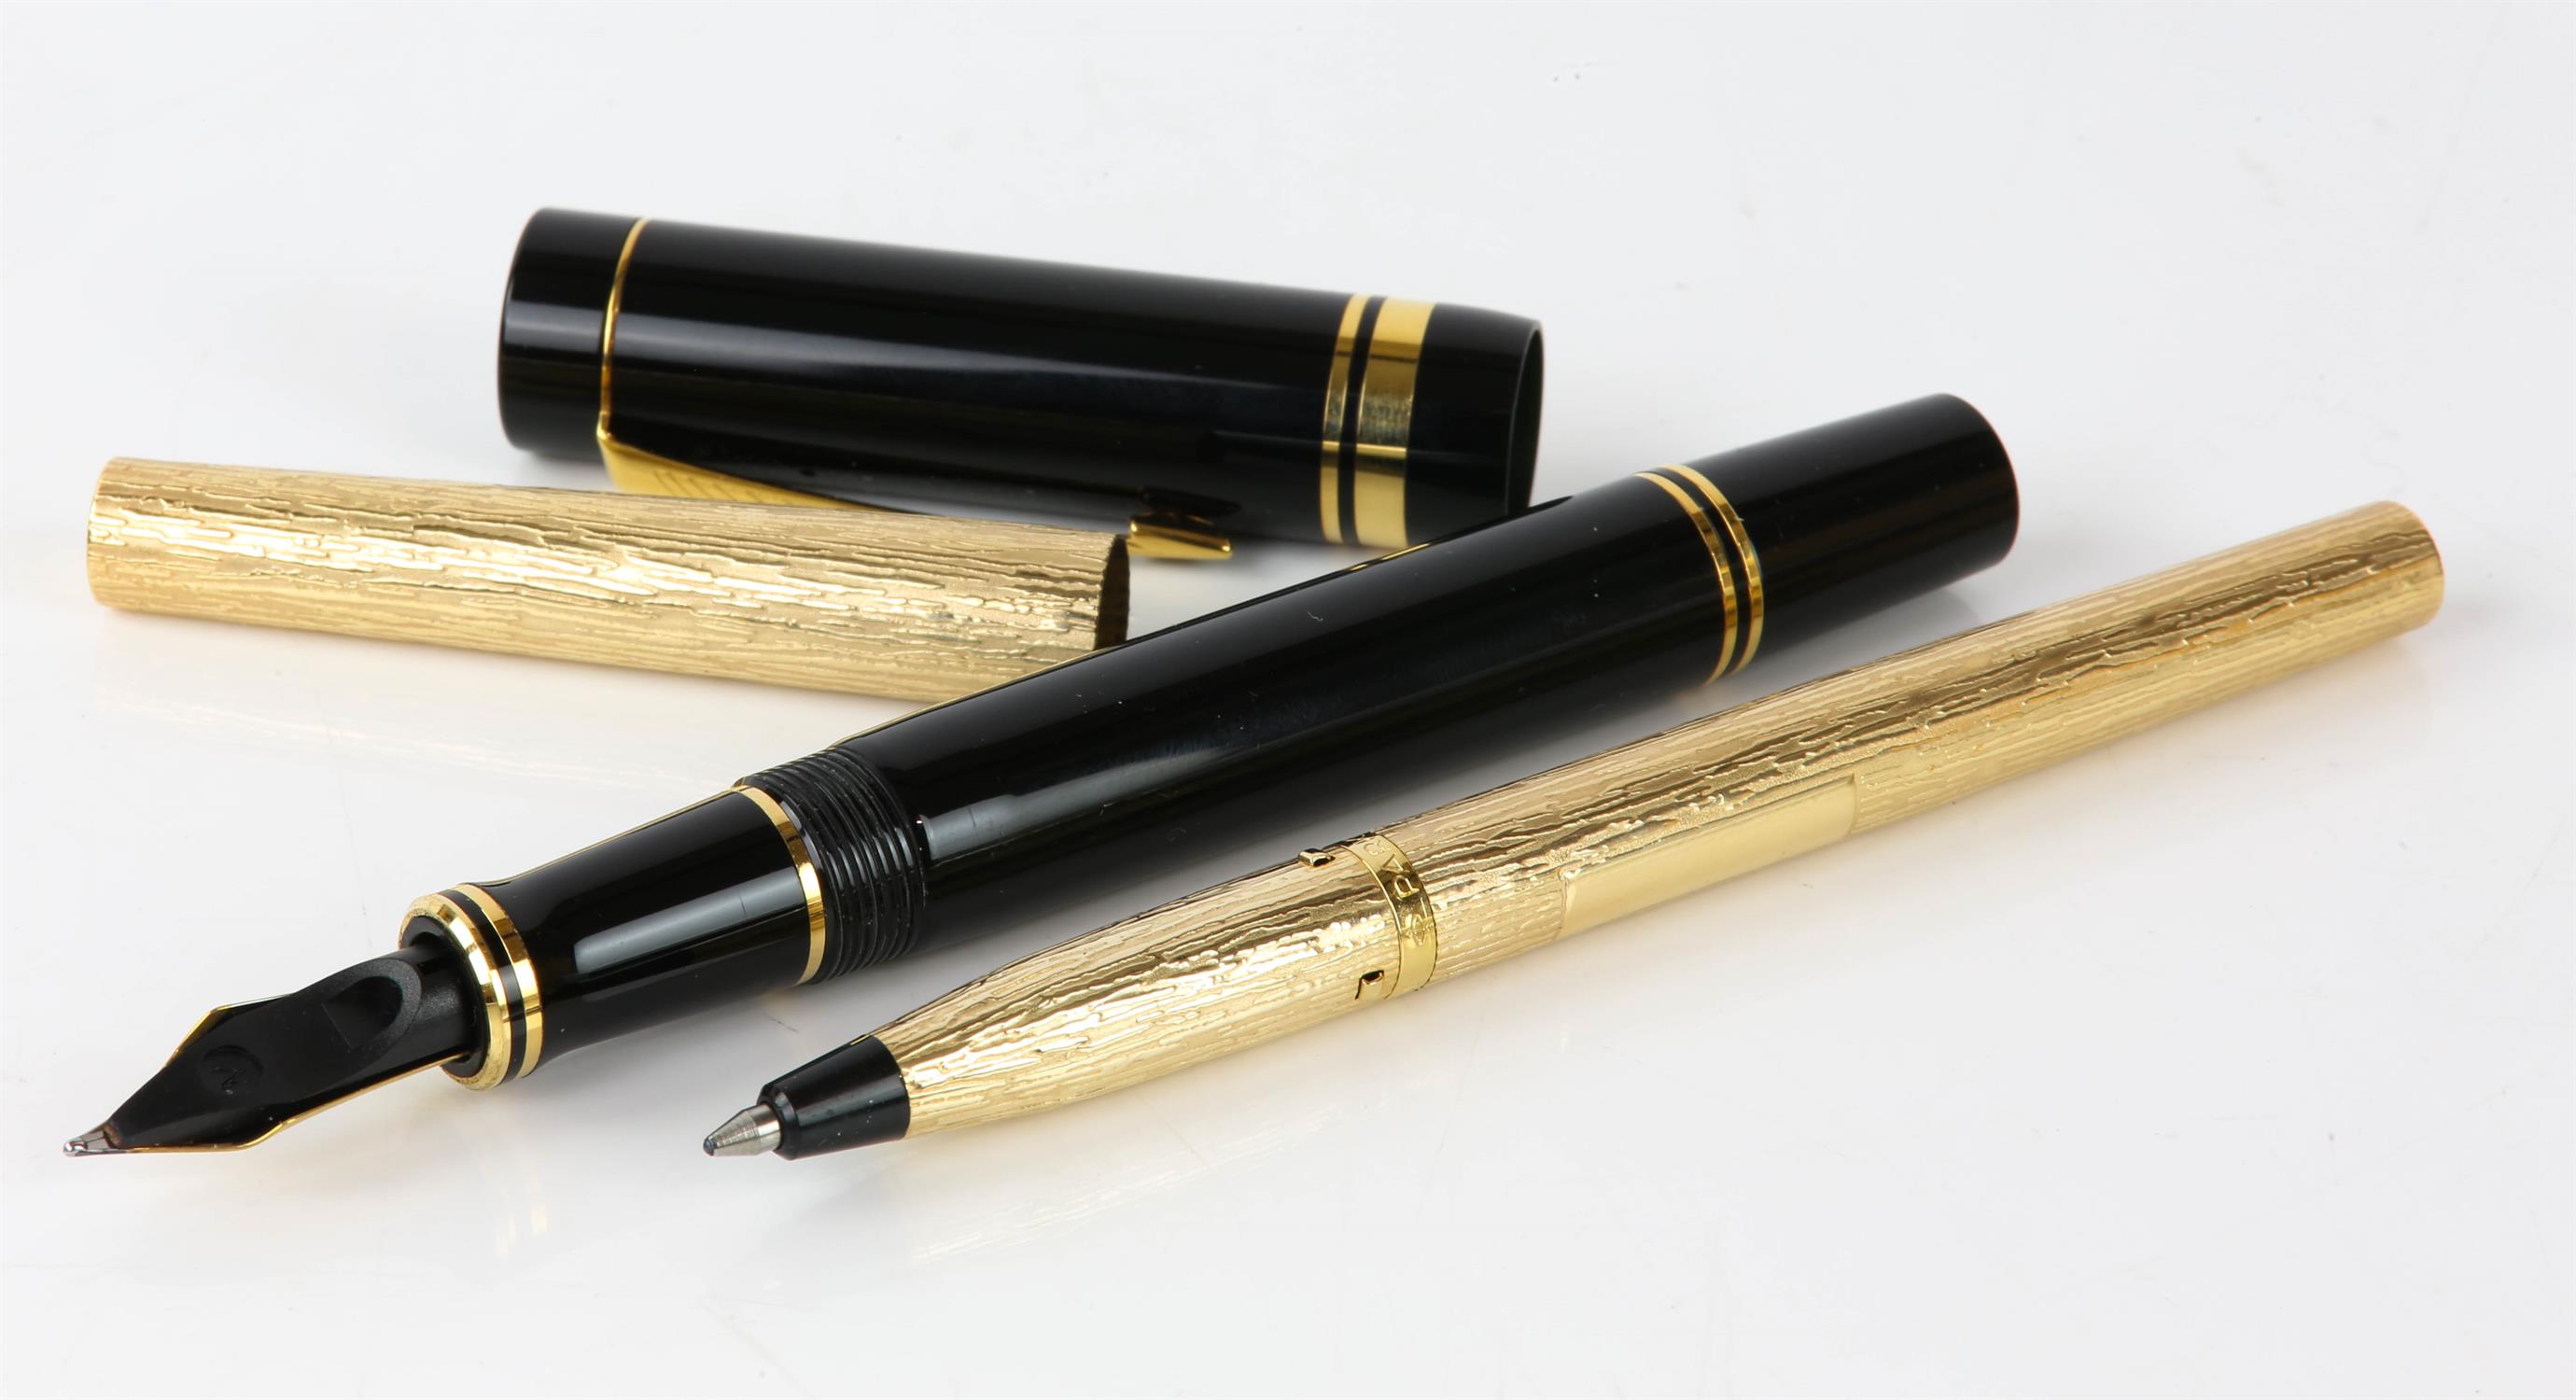 Parker Duofold pens, Fountain pen with 18ct nib, in black with black barrel and cap, - Image 3 of 3